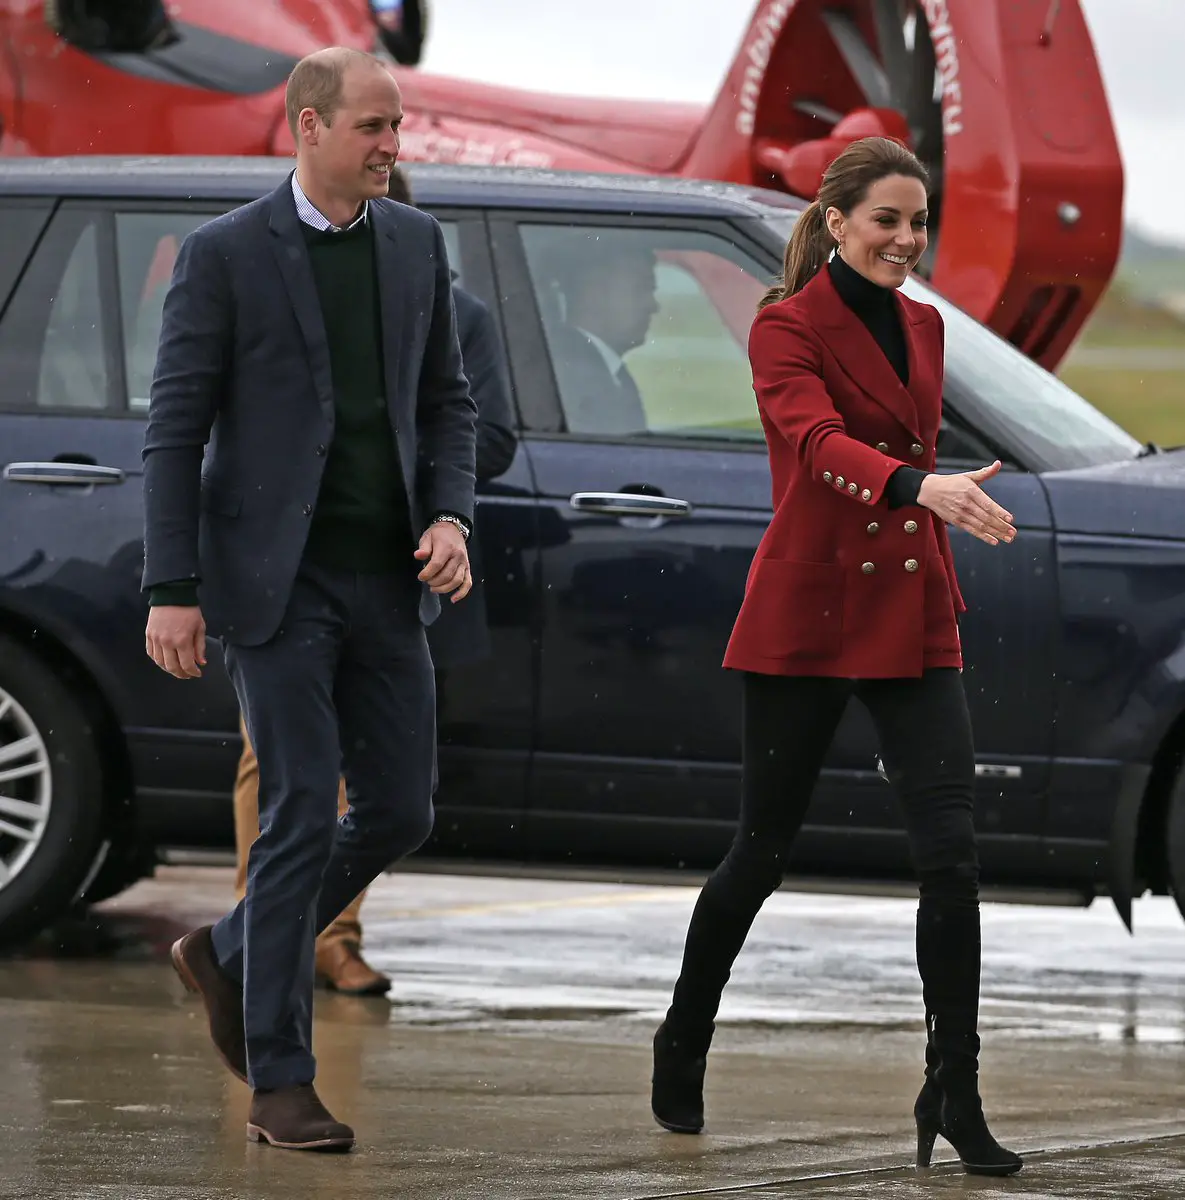 The Duchess of Cambridge was in her old favourites. She wore a red Philosophy di Lorenzo Serafini blazer that she first wore in 2017